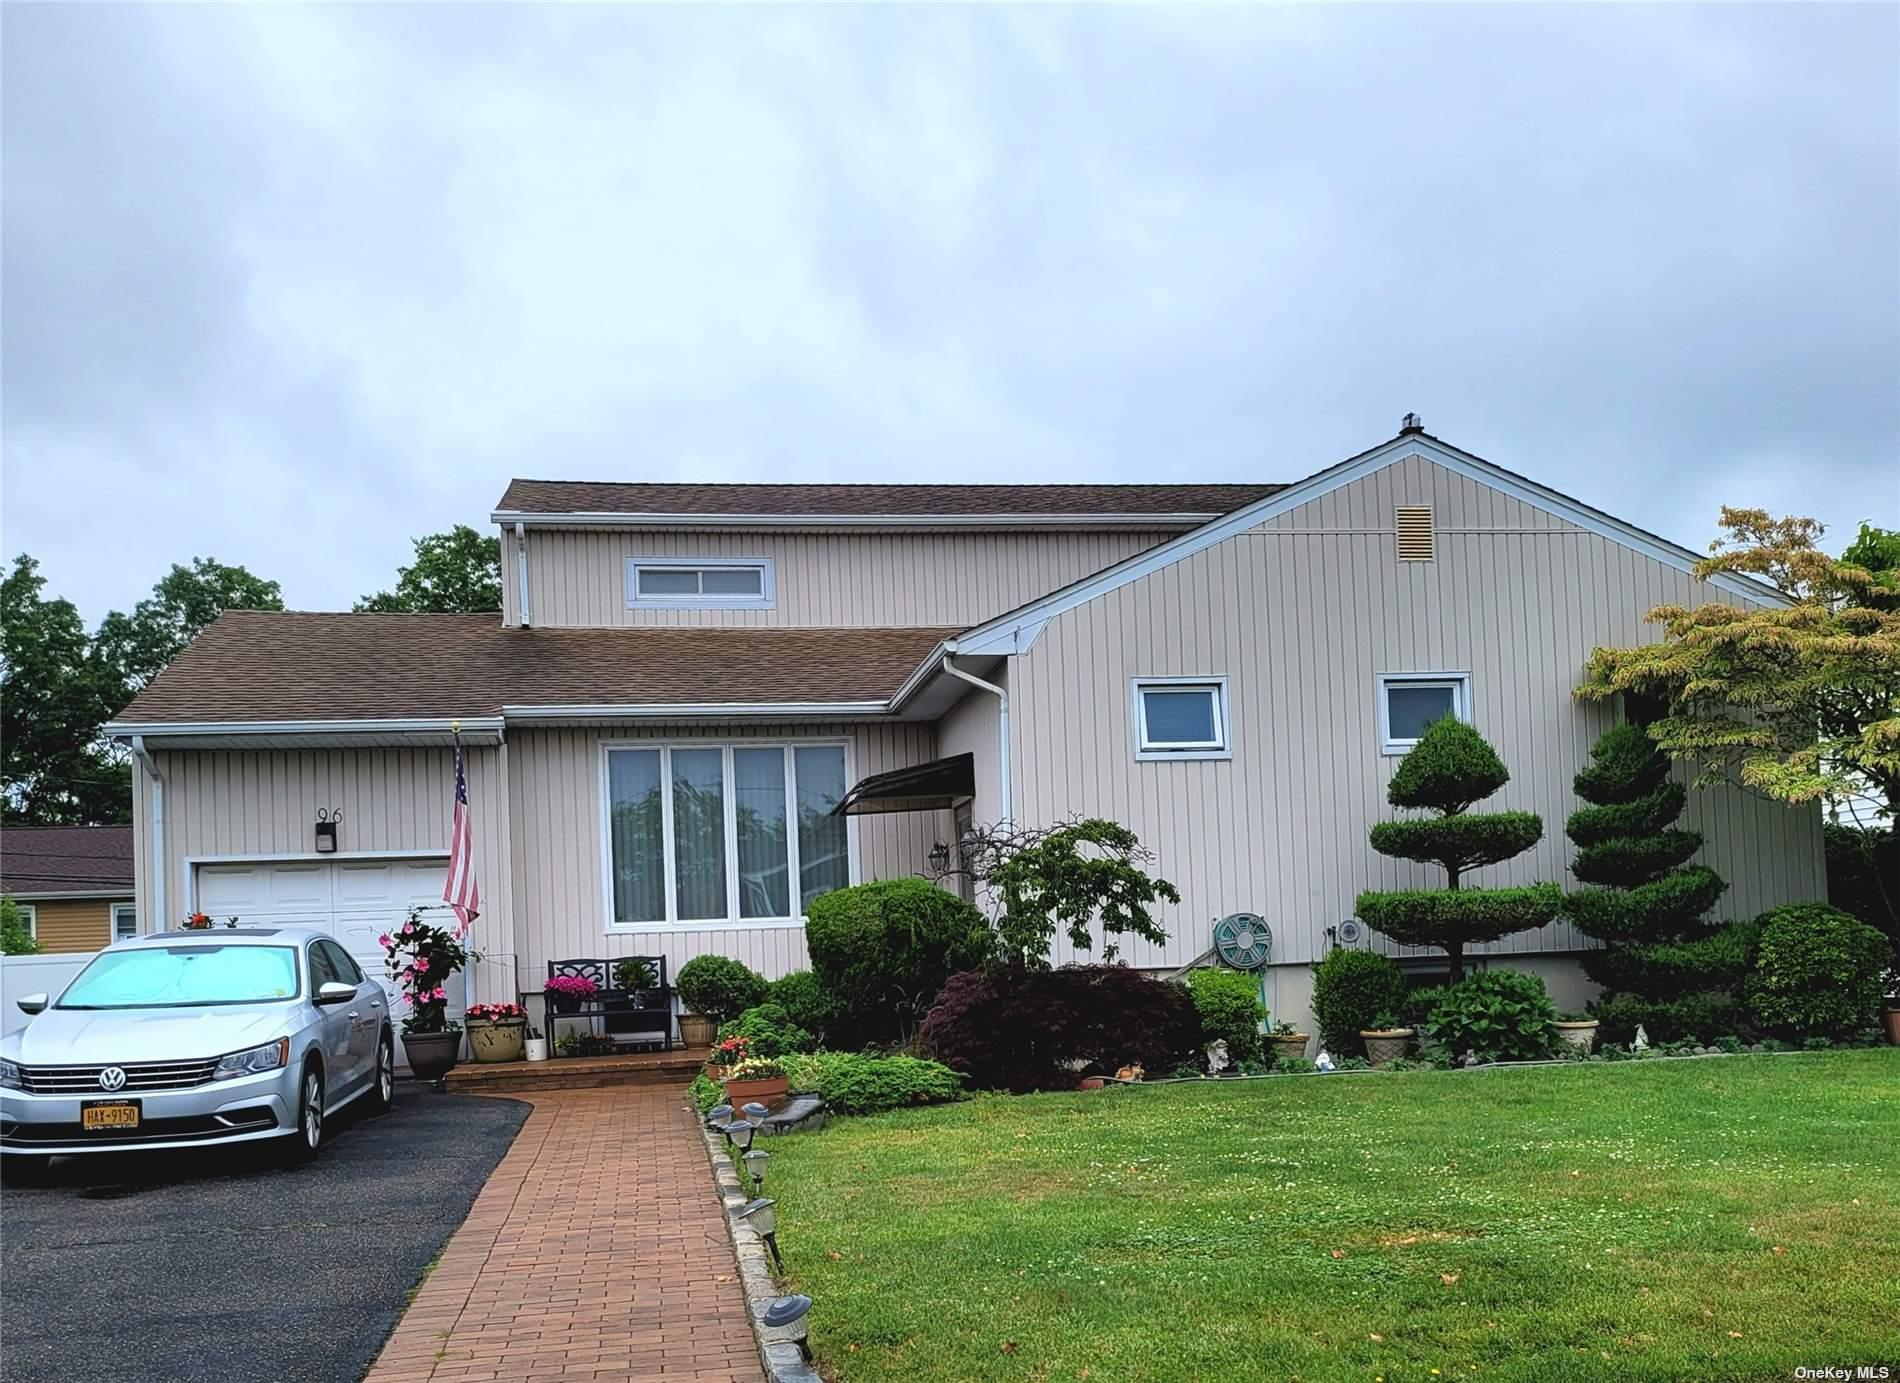 96 Lotus Oval North in Long Island, Valley Stream, NY 11581